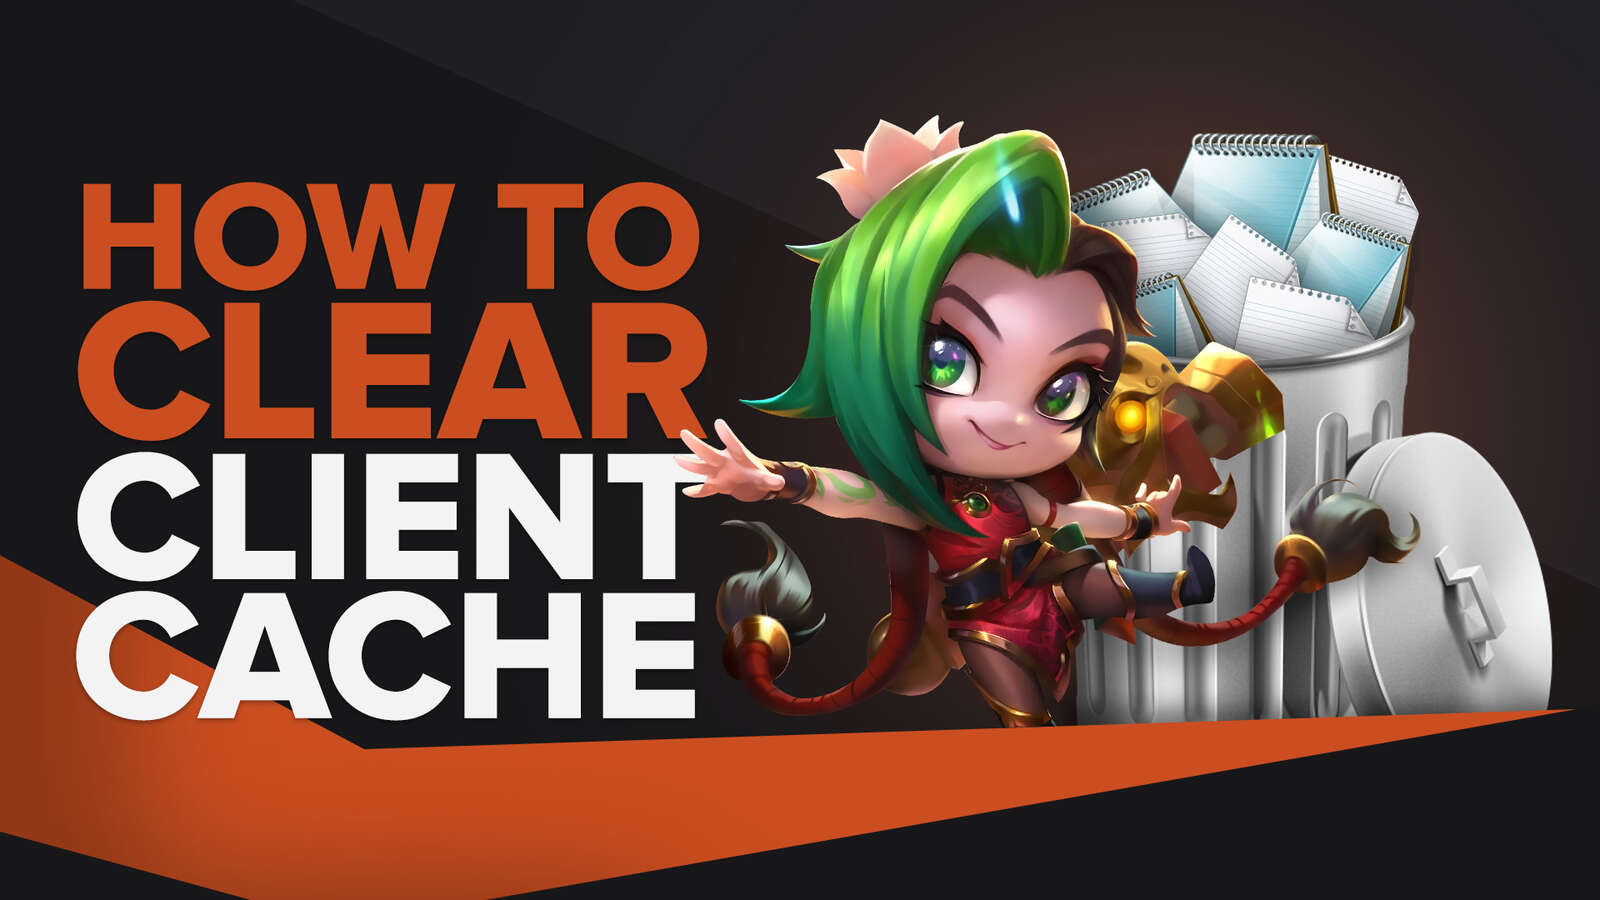 How to Clear Client Cache in League of Legends